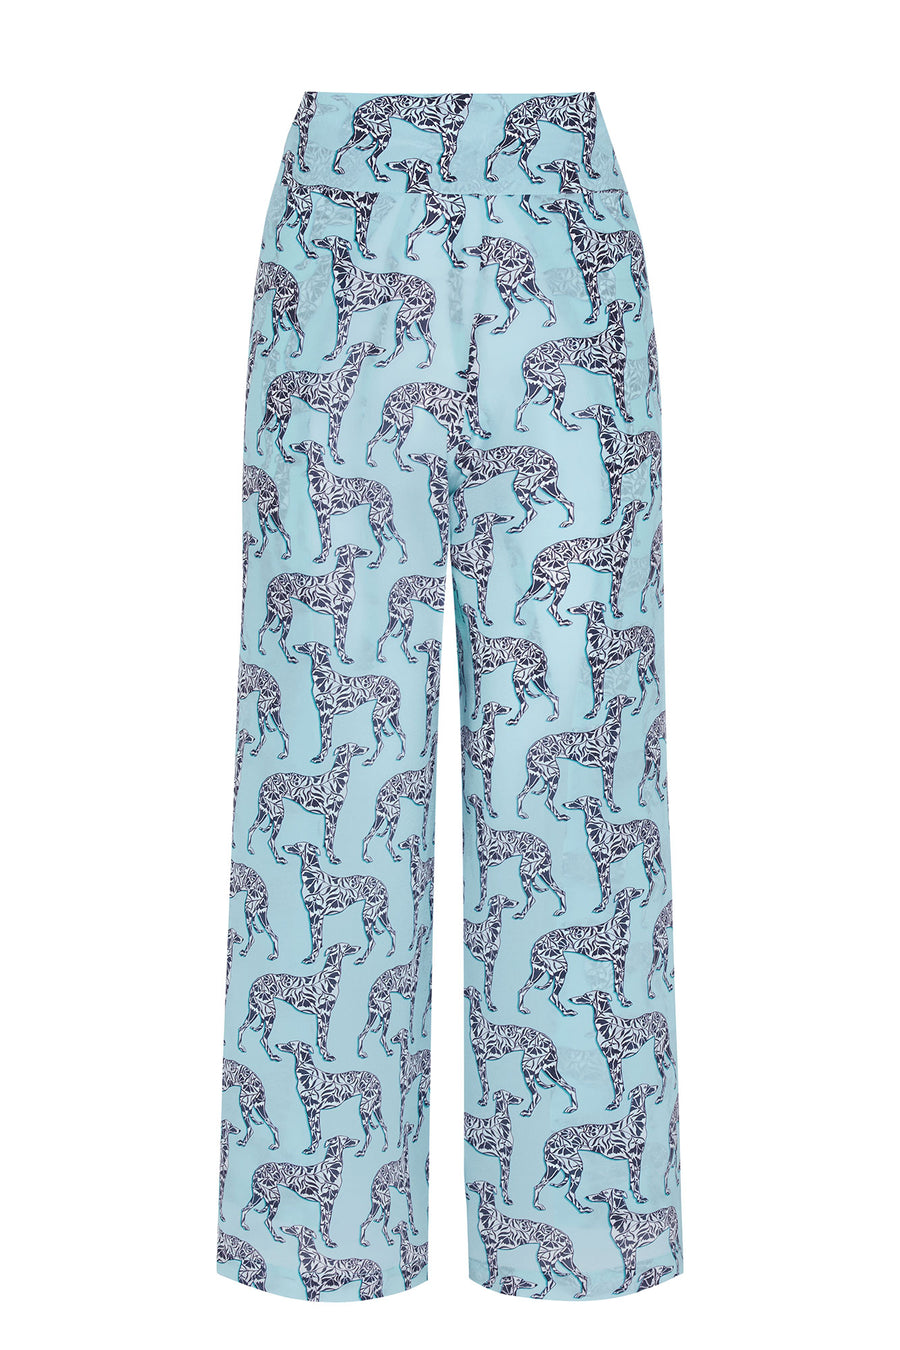 Luxury pure silk palazzo pants in Lurcher dog aubergine & pale blue print by Lotty B Mustique